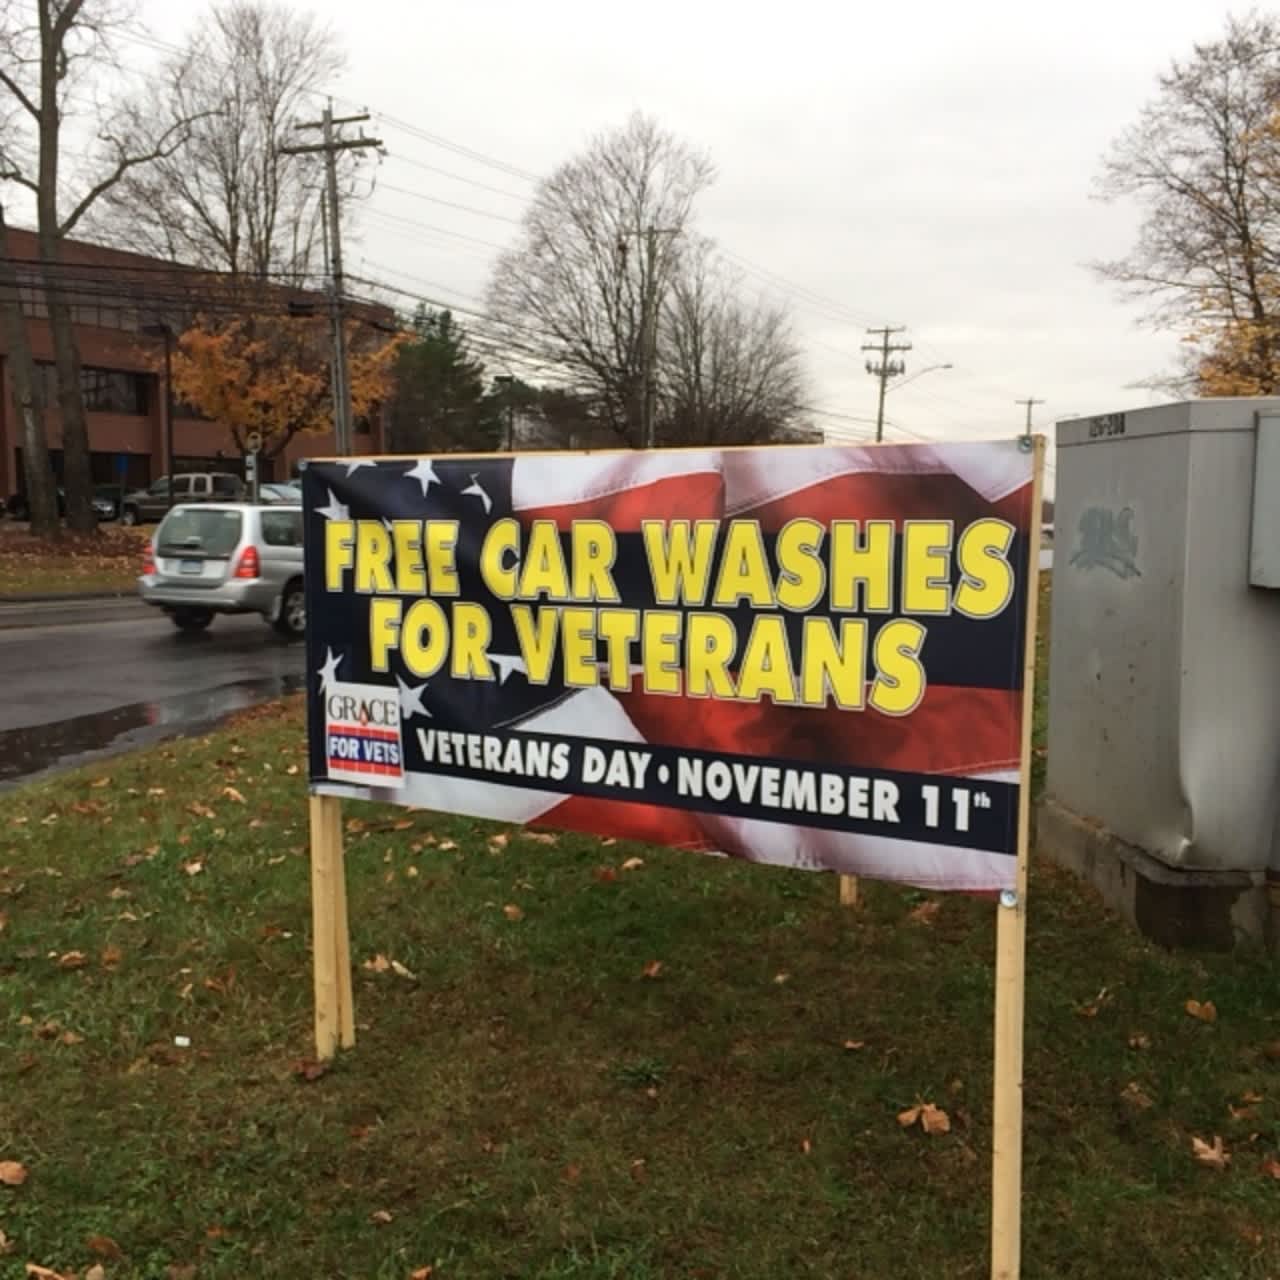 Free car washes for veterans and service personnel are offered at Splash in Shelton.